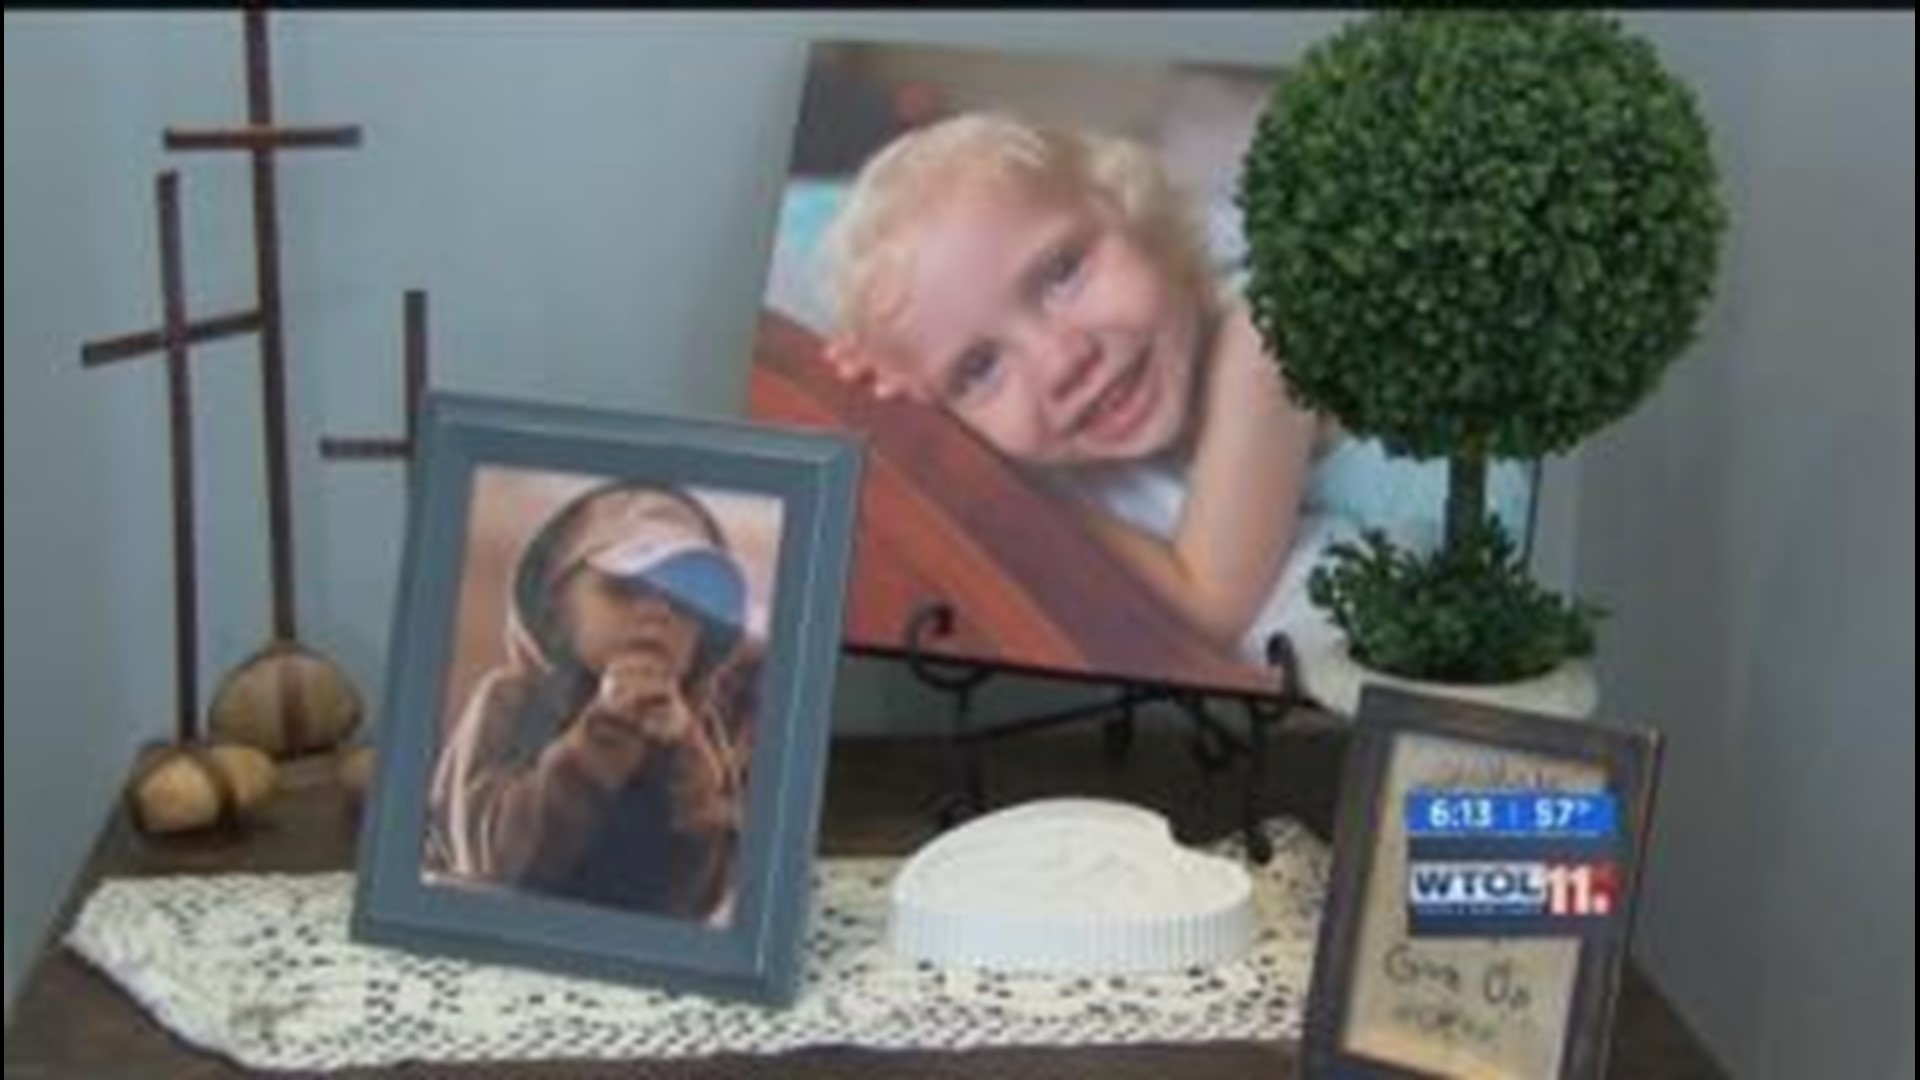 Running for a Cure: Two Ohio children lost to cancer honored at NYC Marathon